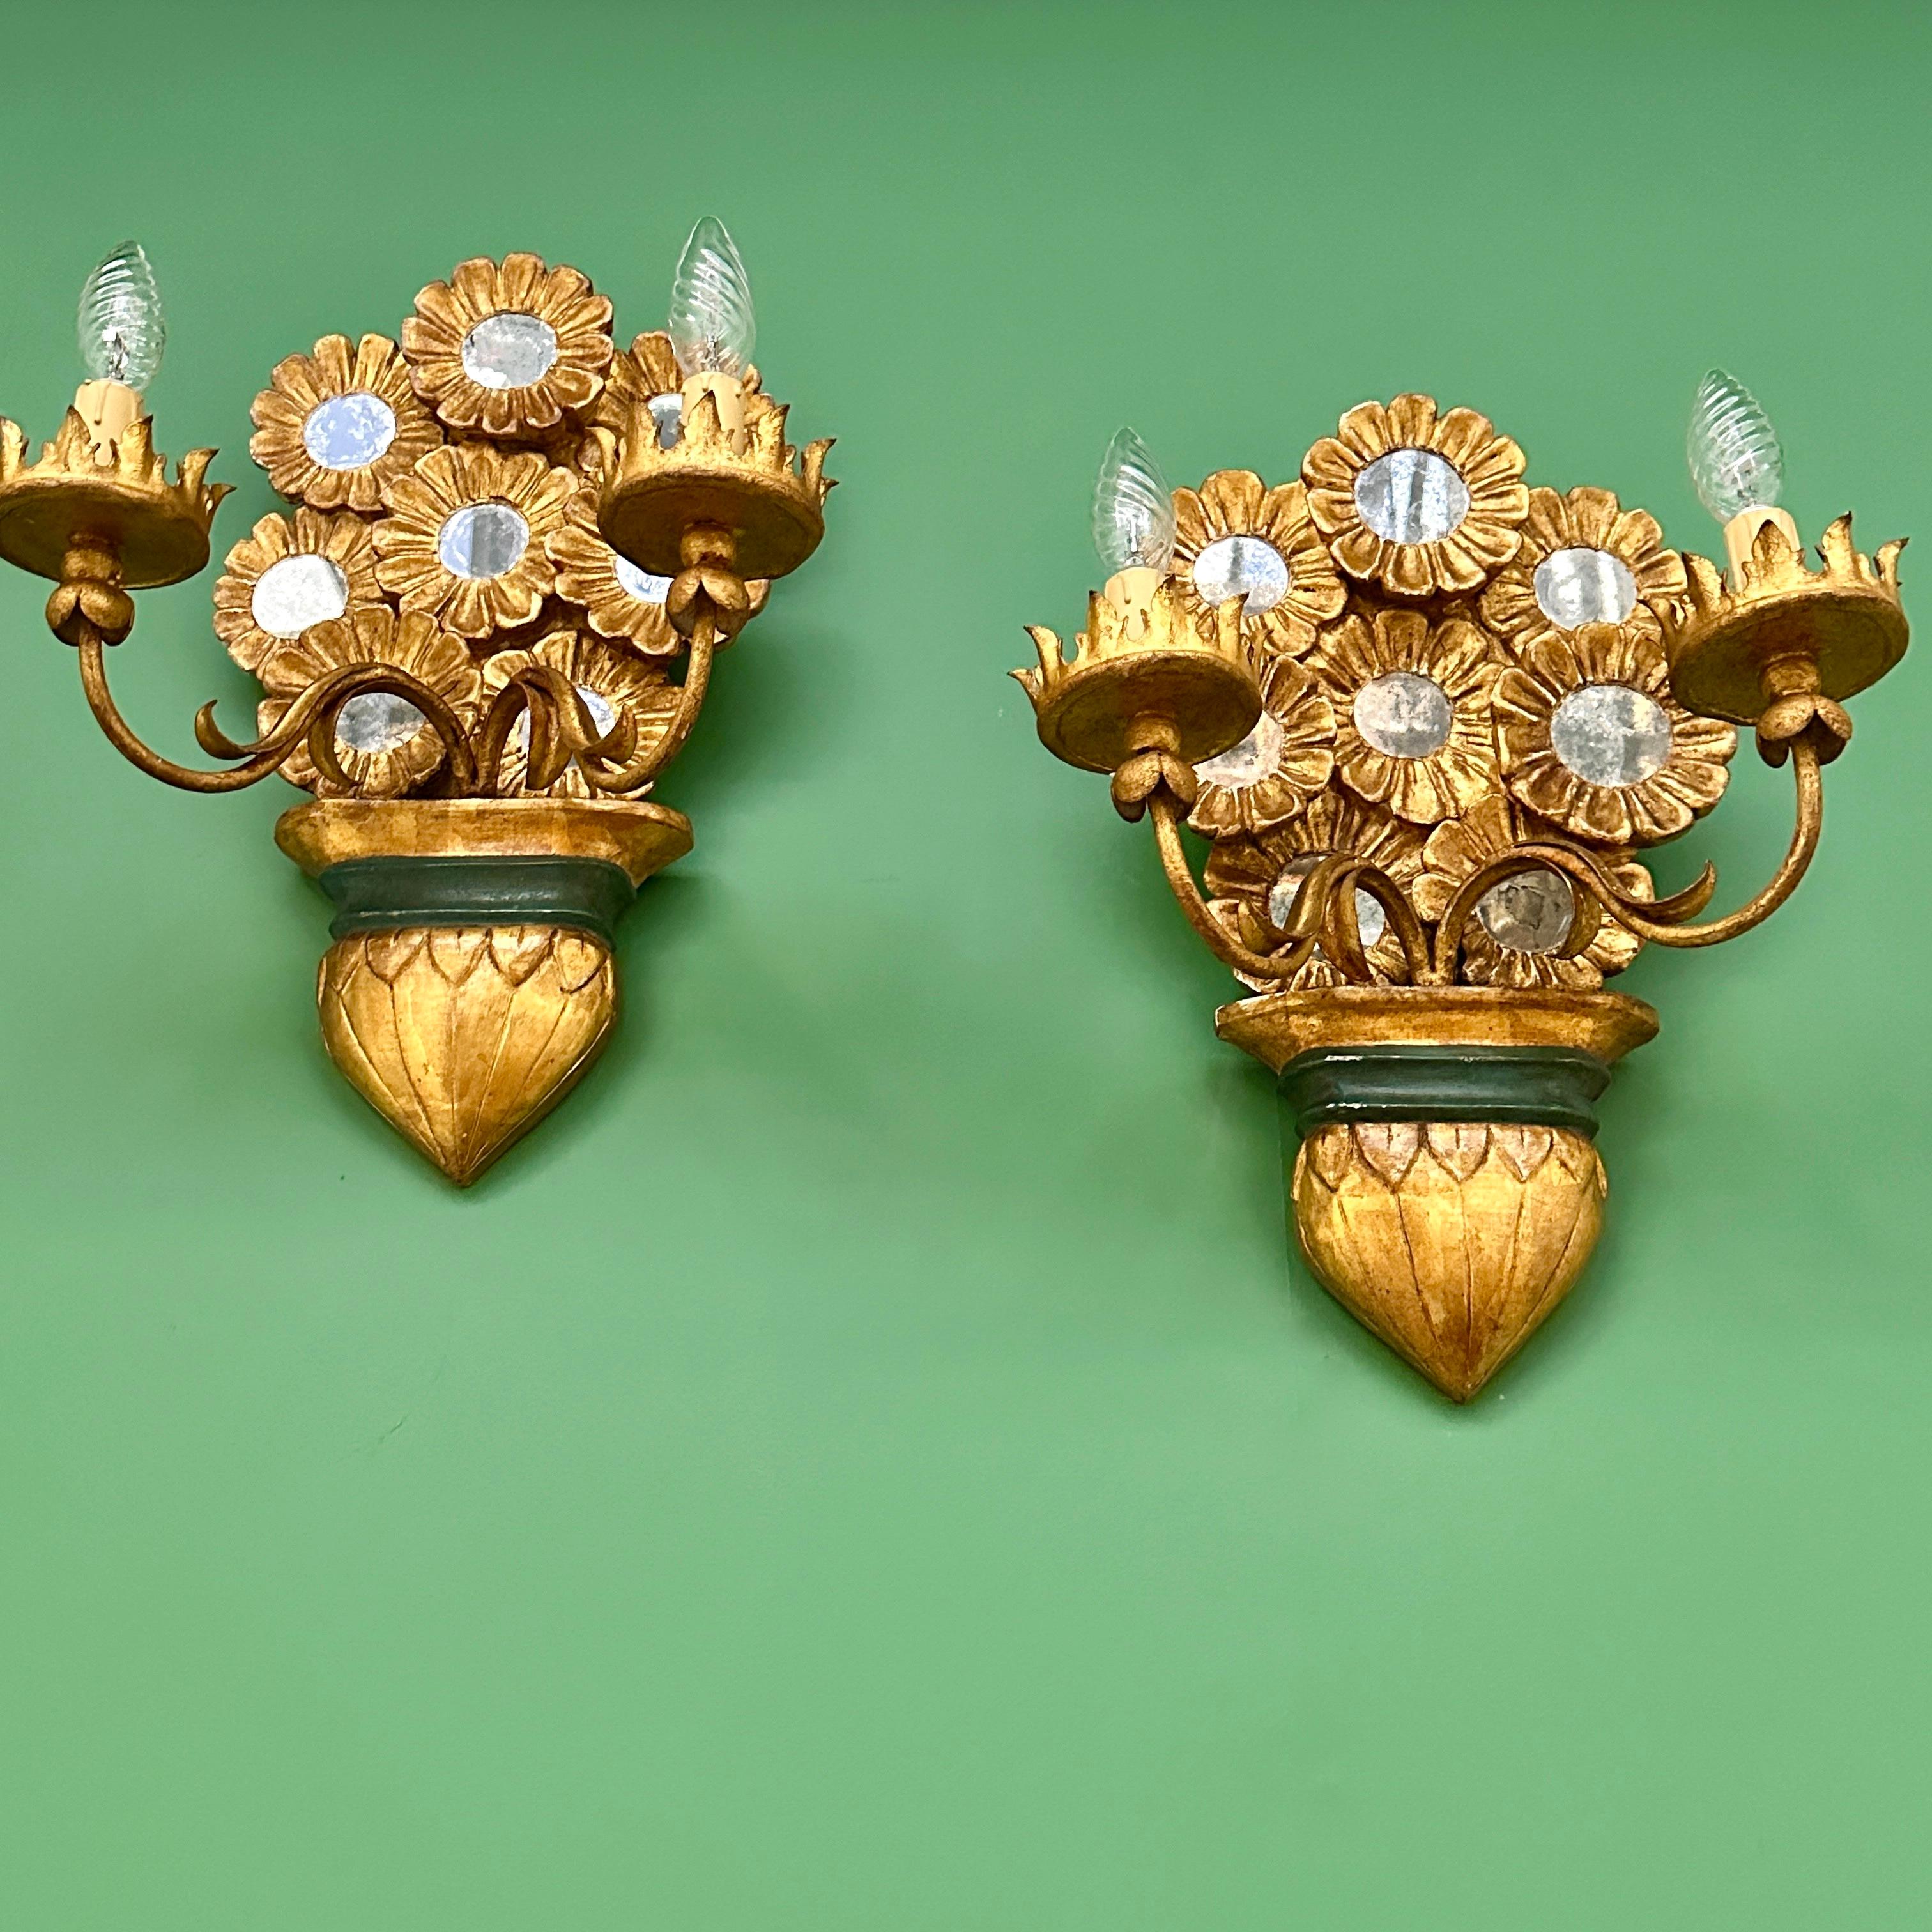 Mirror Pair Of Early C20th Italian Giltwood Wall Lights (1 of 2 pairs available) For Sale